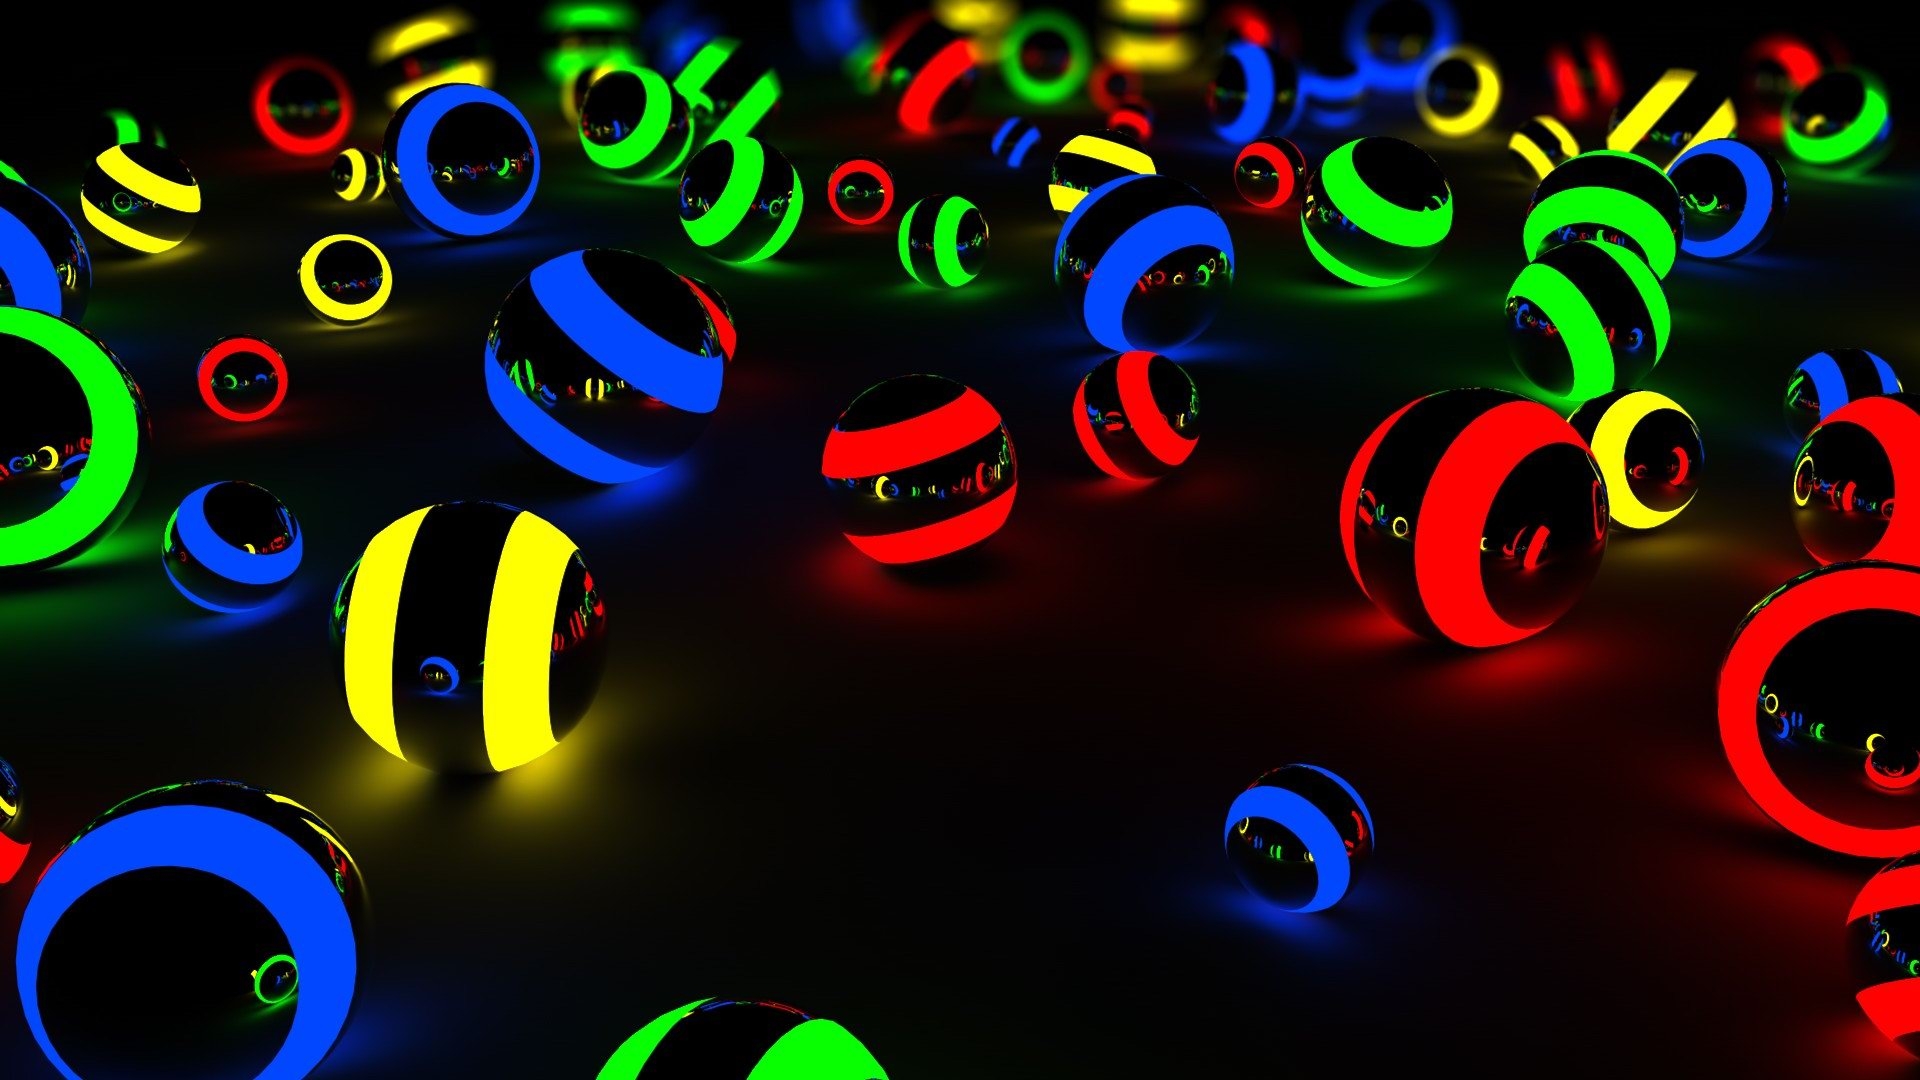 3d Wallpapers 3D ABSTRACT BALLS COLORFUL 0014 7729 1920x1080